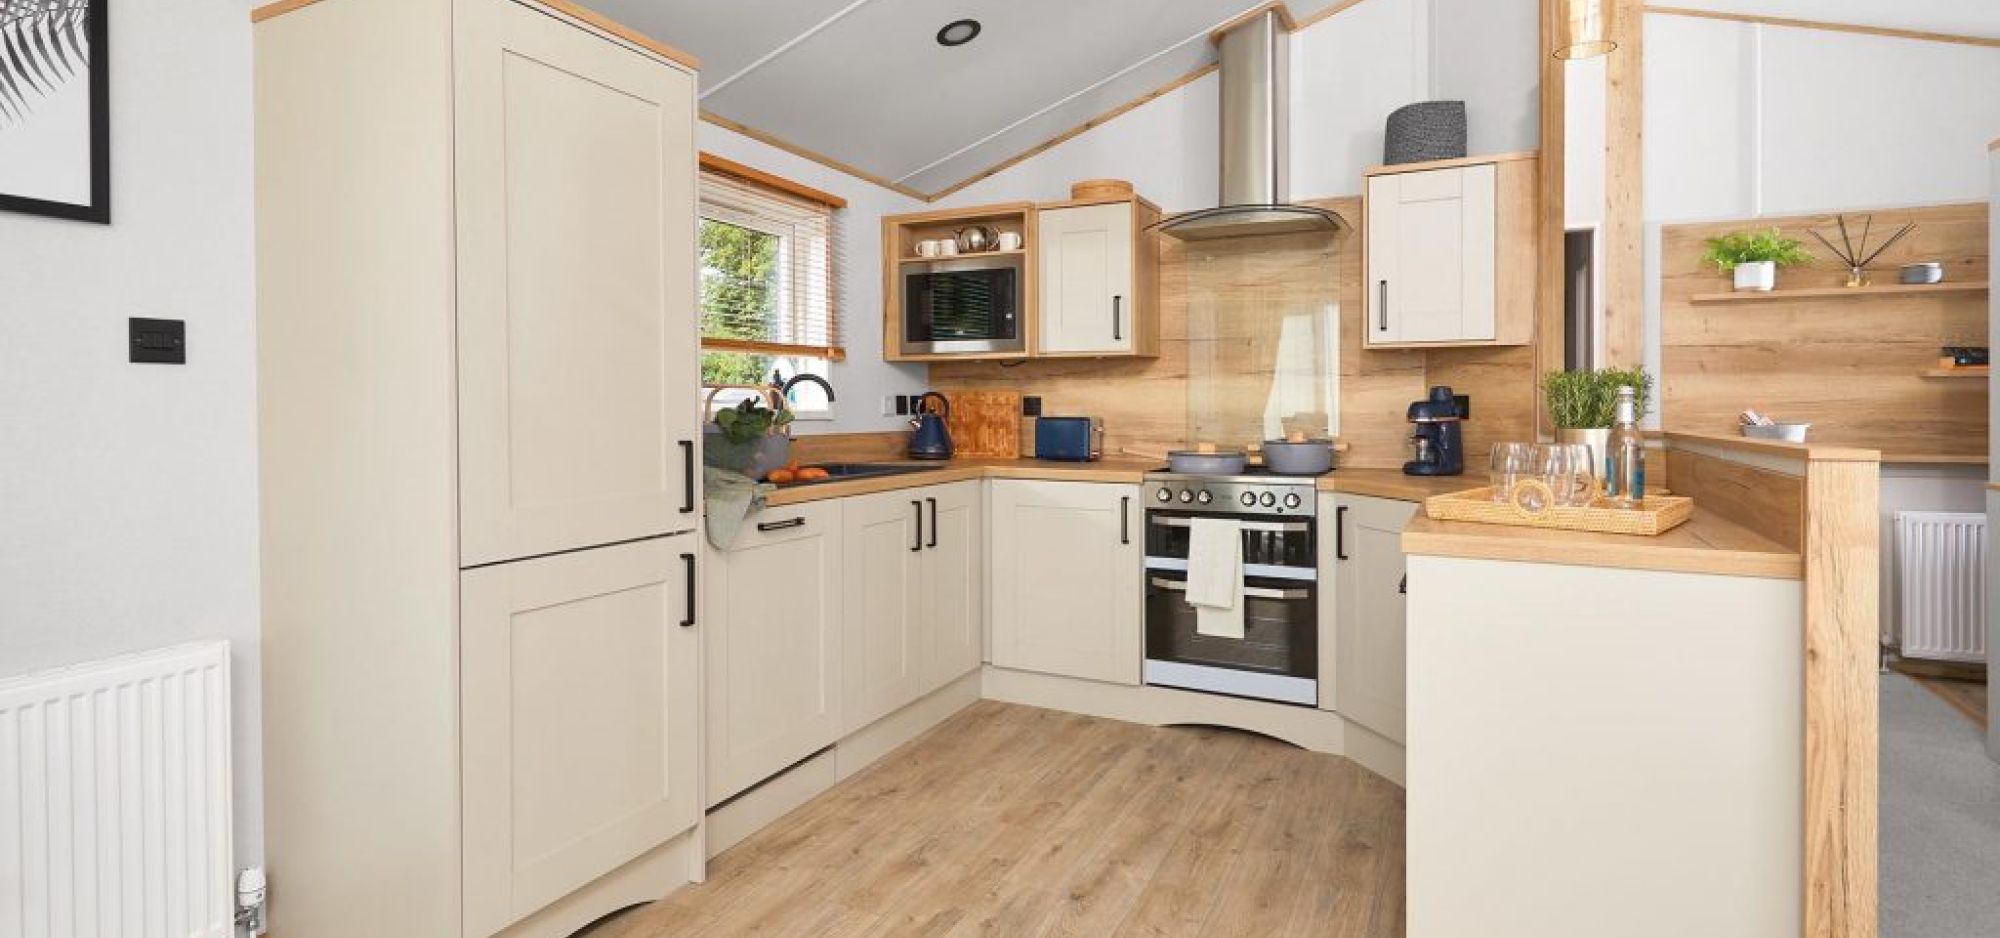 holiday lodge kitchen space